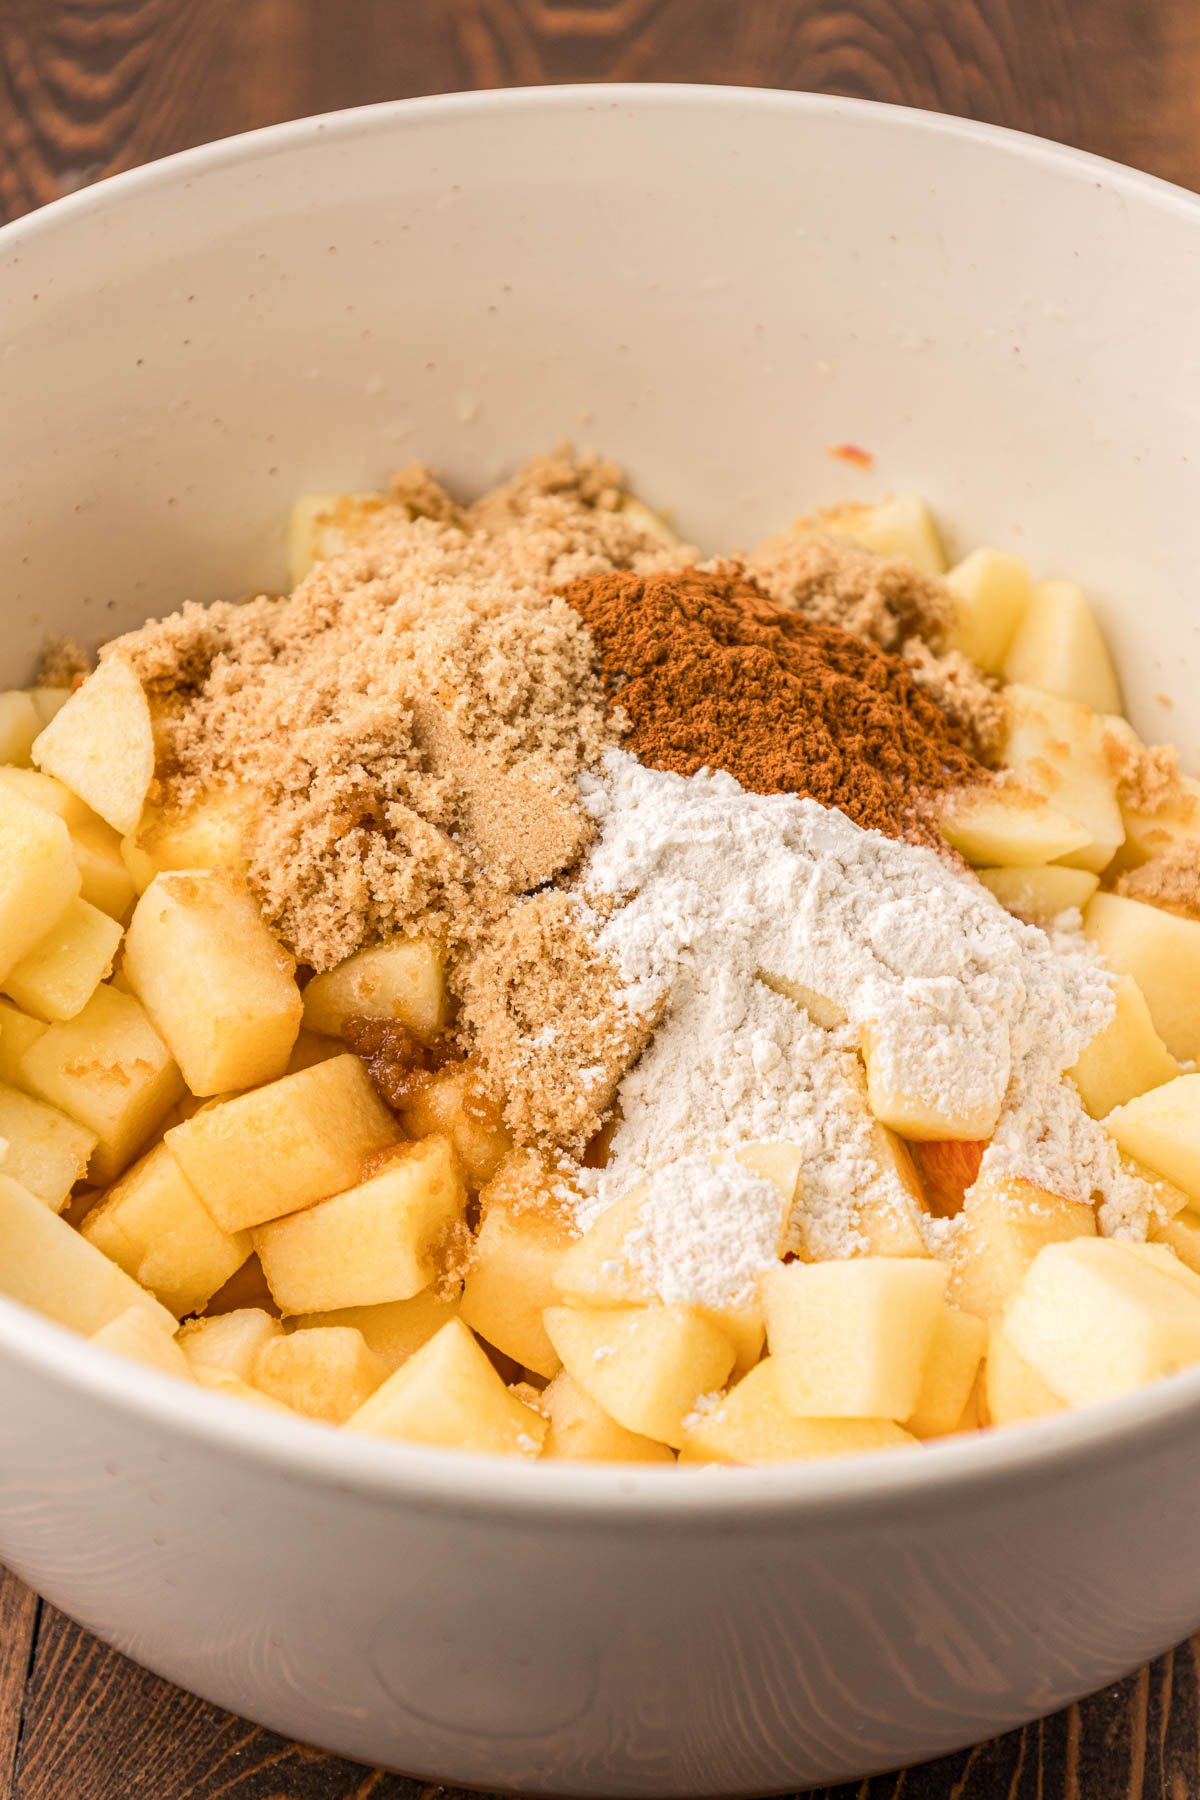 Chopped apples in a white bowl with flour and spices.